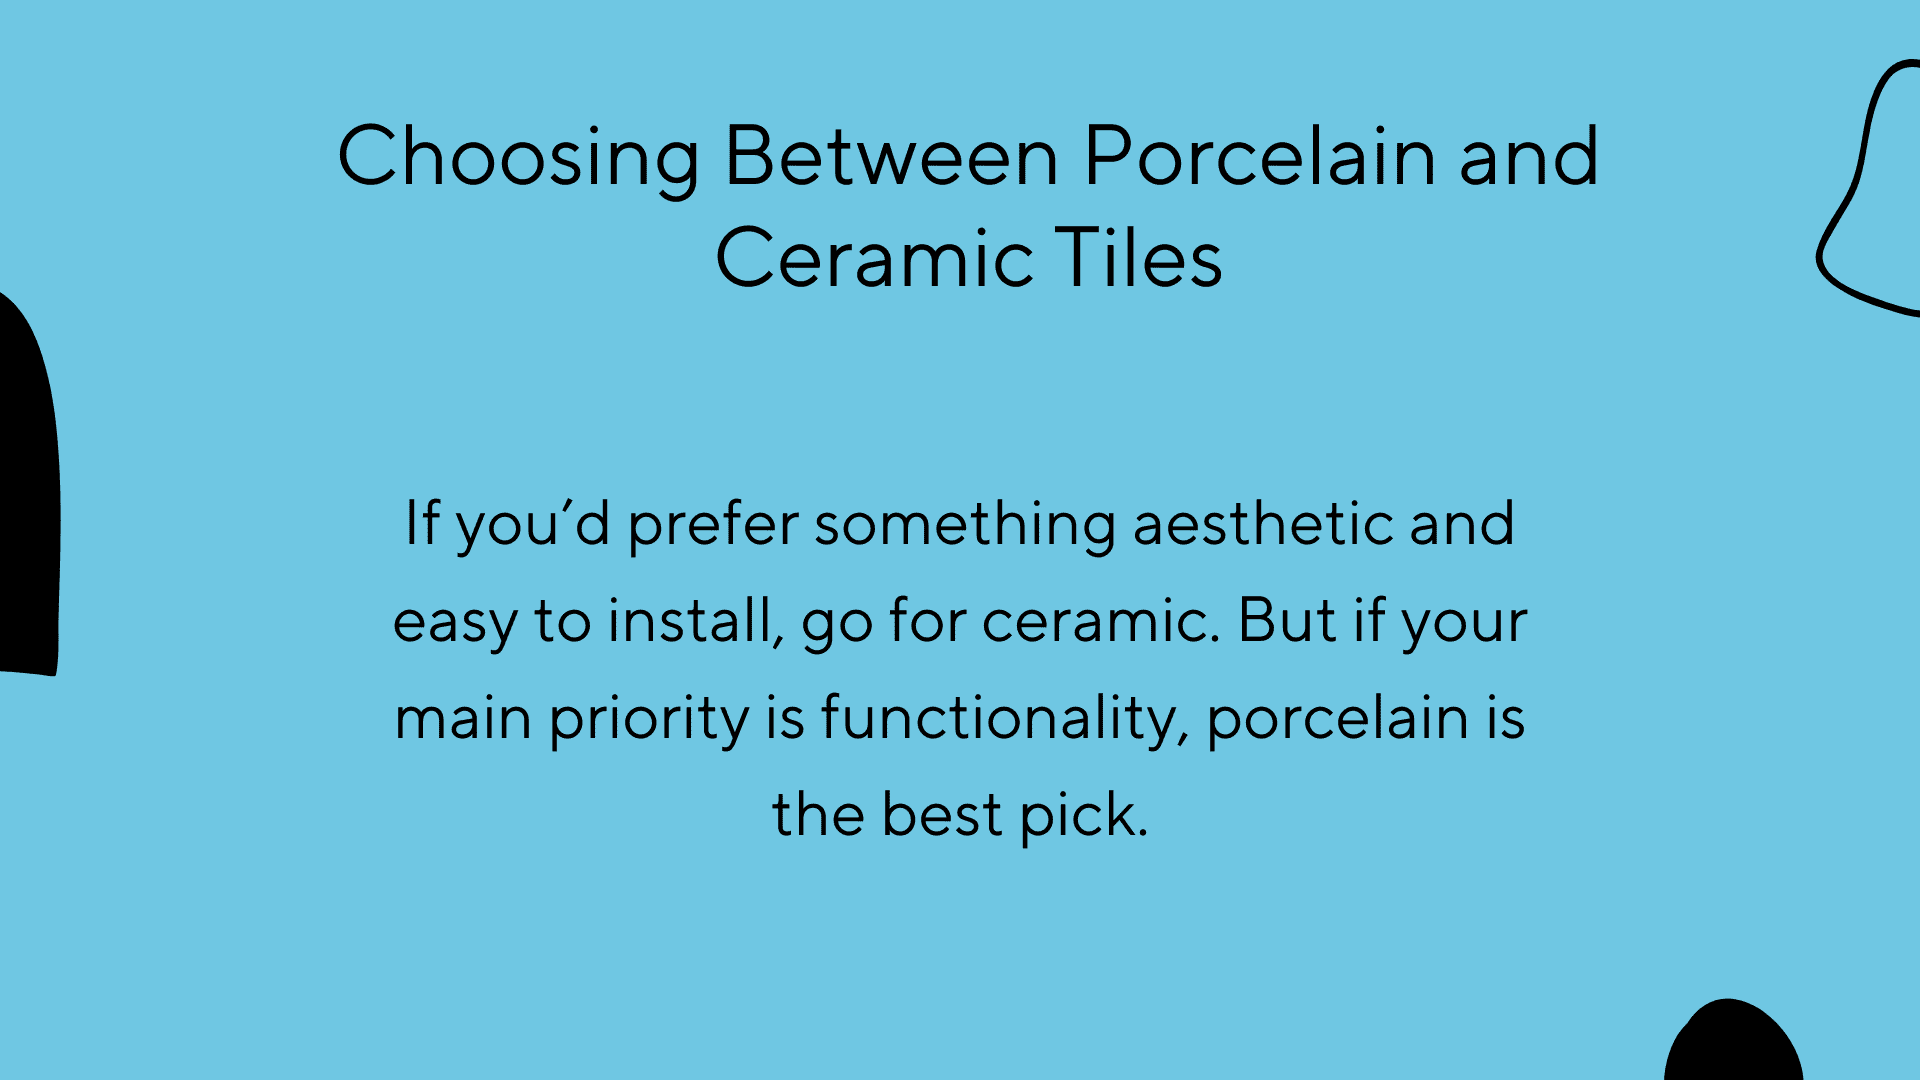 how to choose between porcelain and ceramic tiles